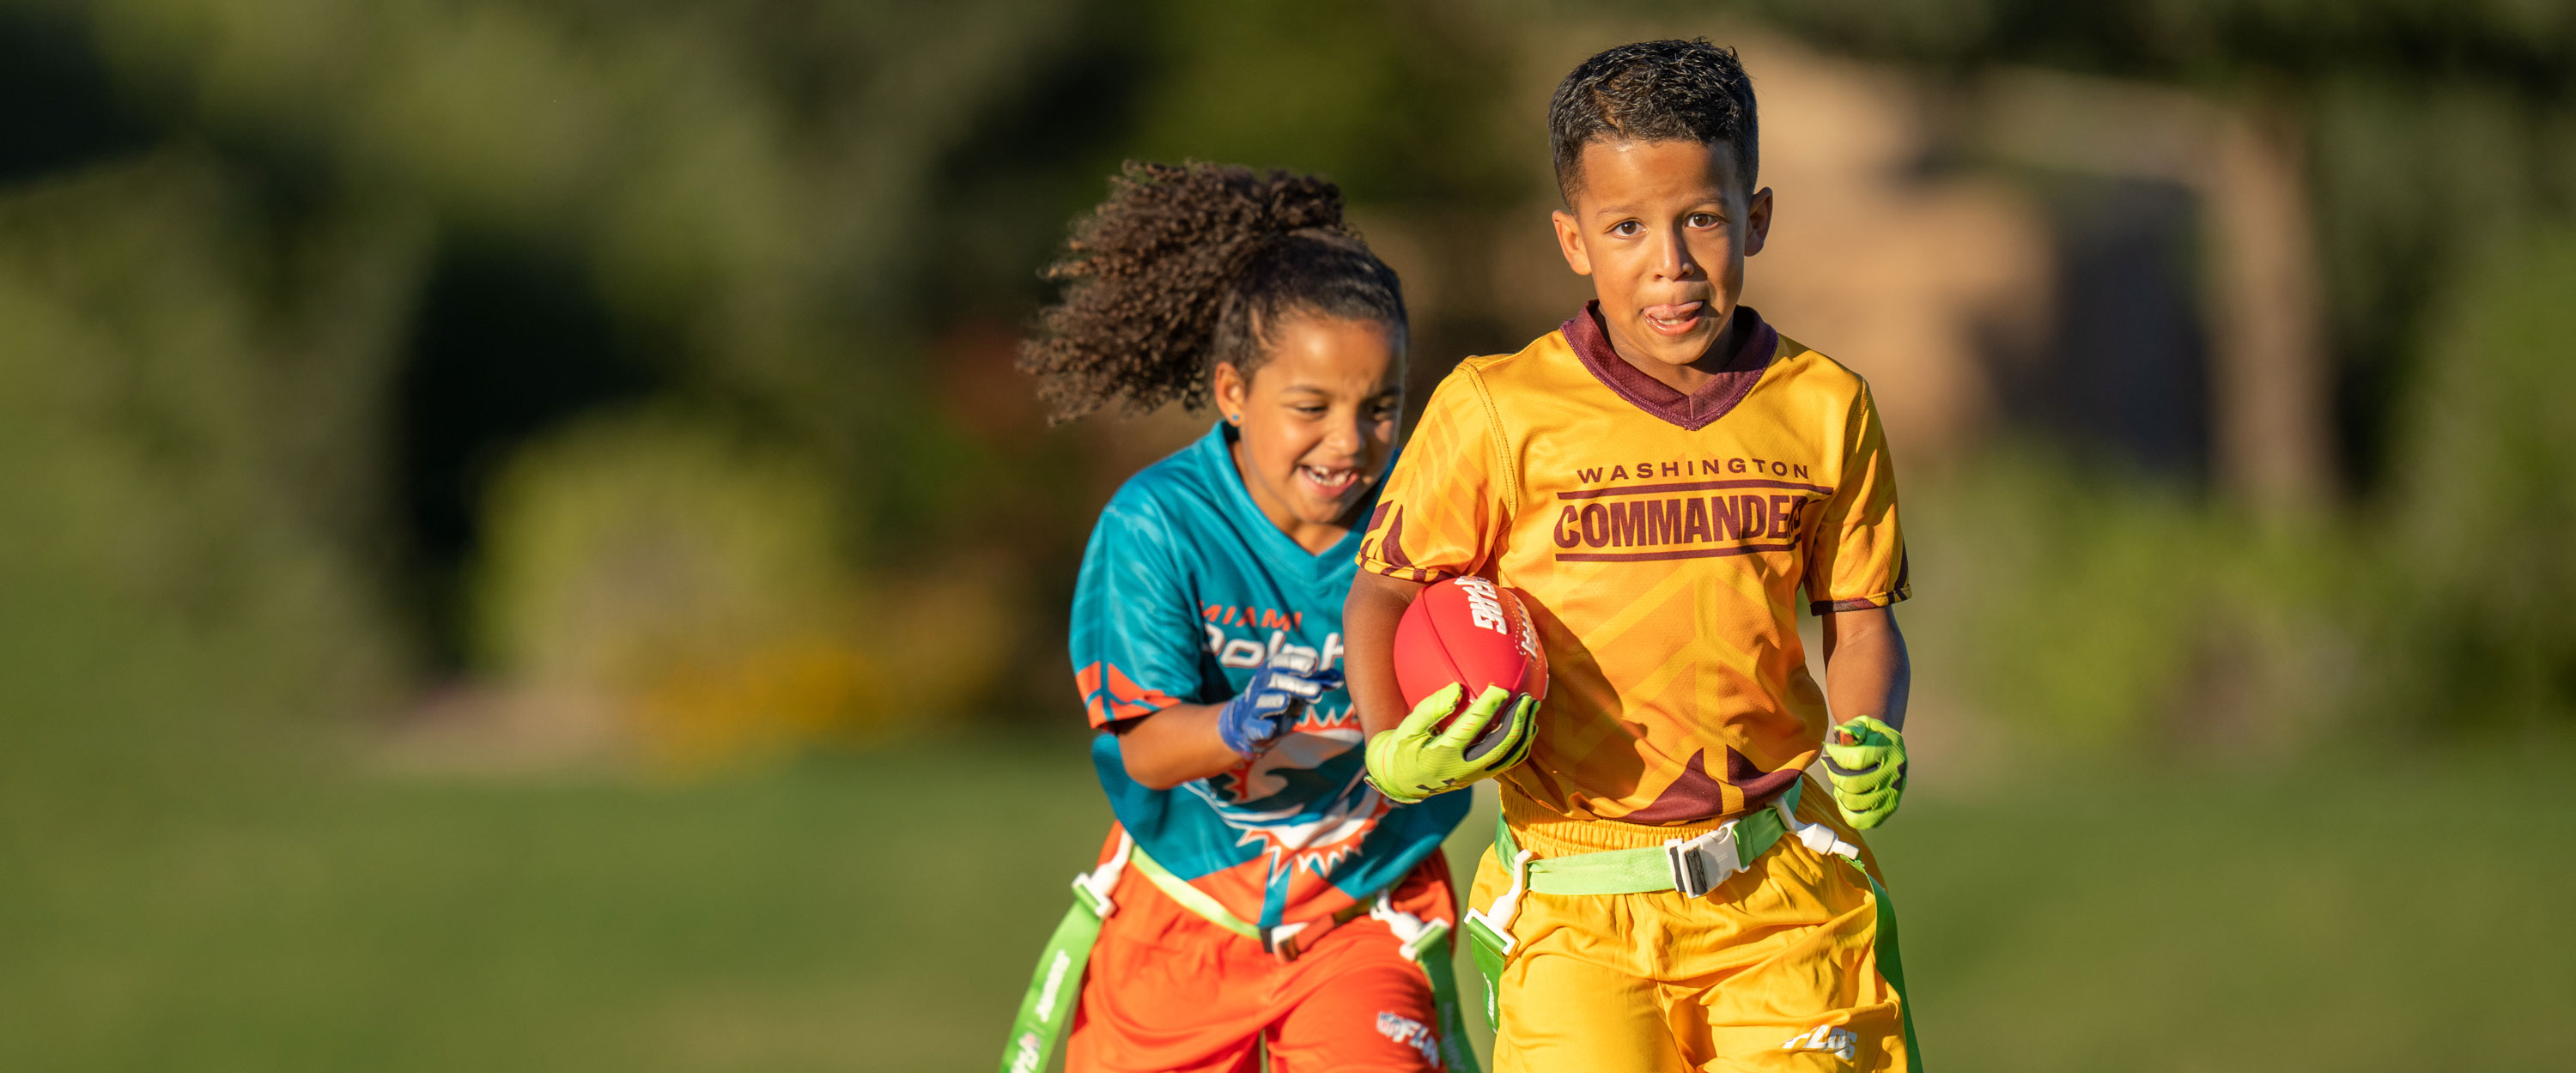 Play Like a Pro Description Register for NFL Flag Football Today!